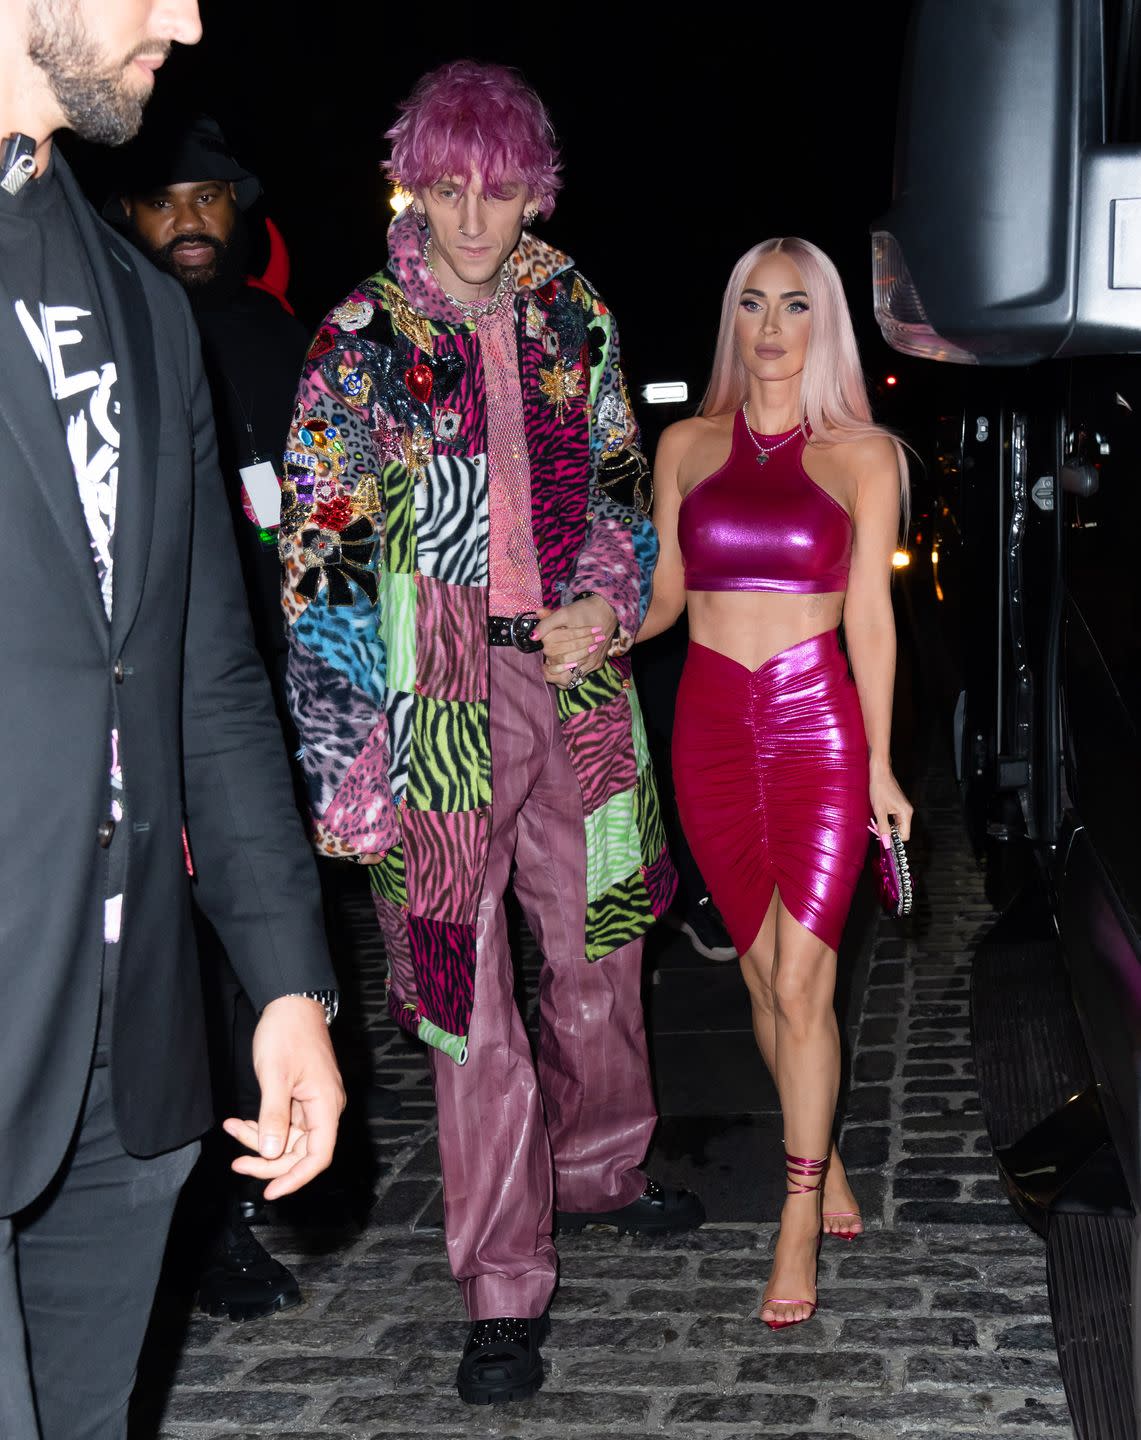 new york, new york june 29 machine gun kelly and megan fox are seen at the after party for his madison square garden show on june 29, 2022 in new york city photo by gothamgc images